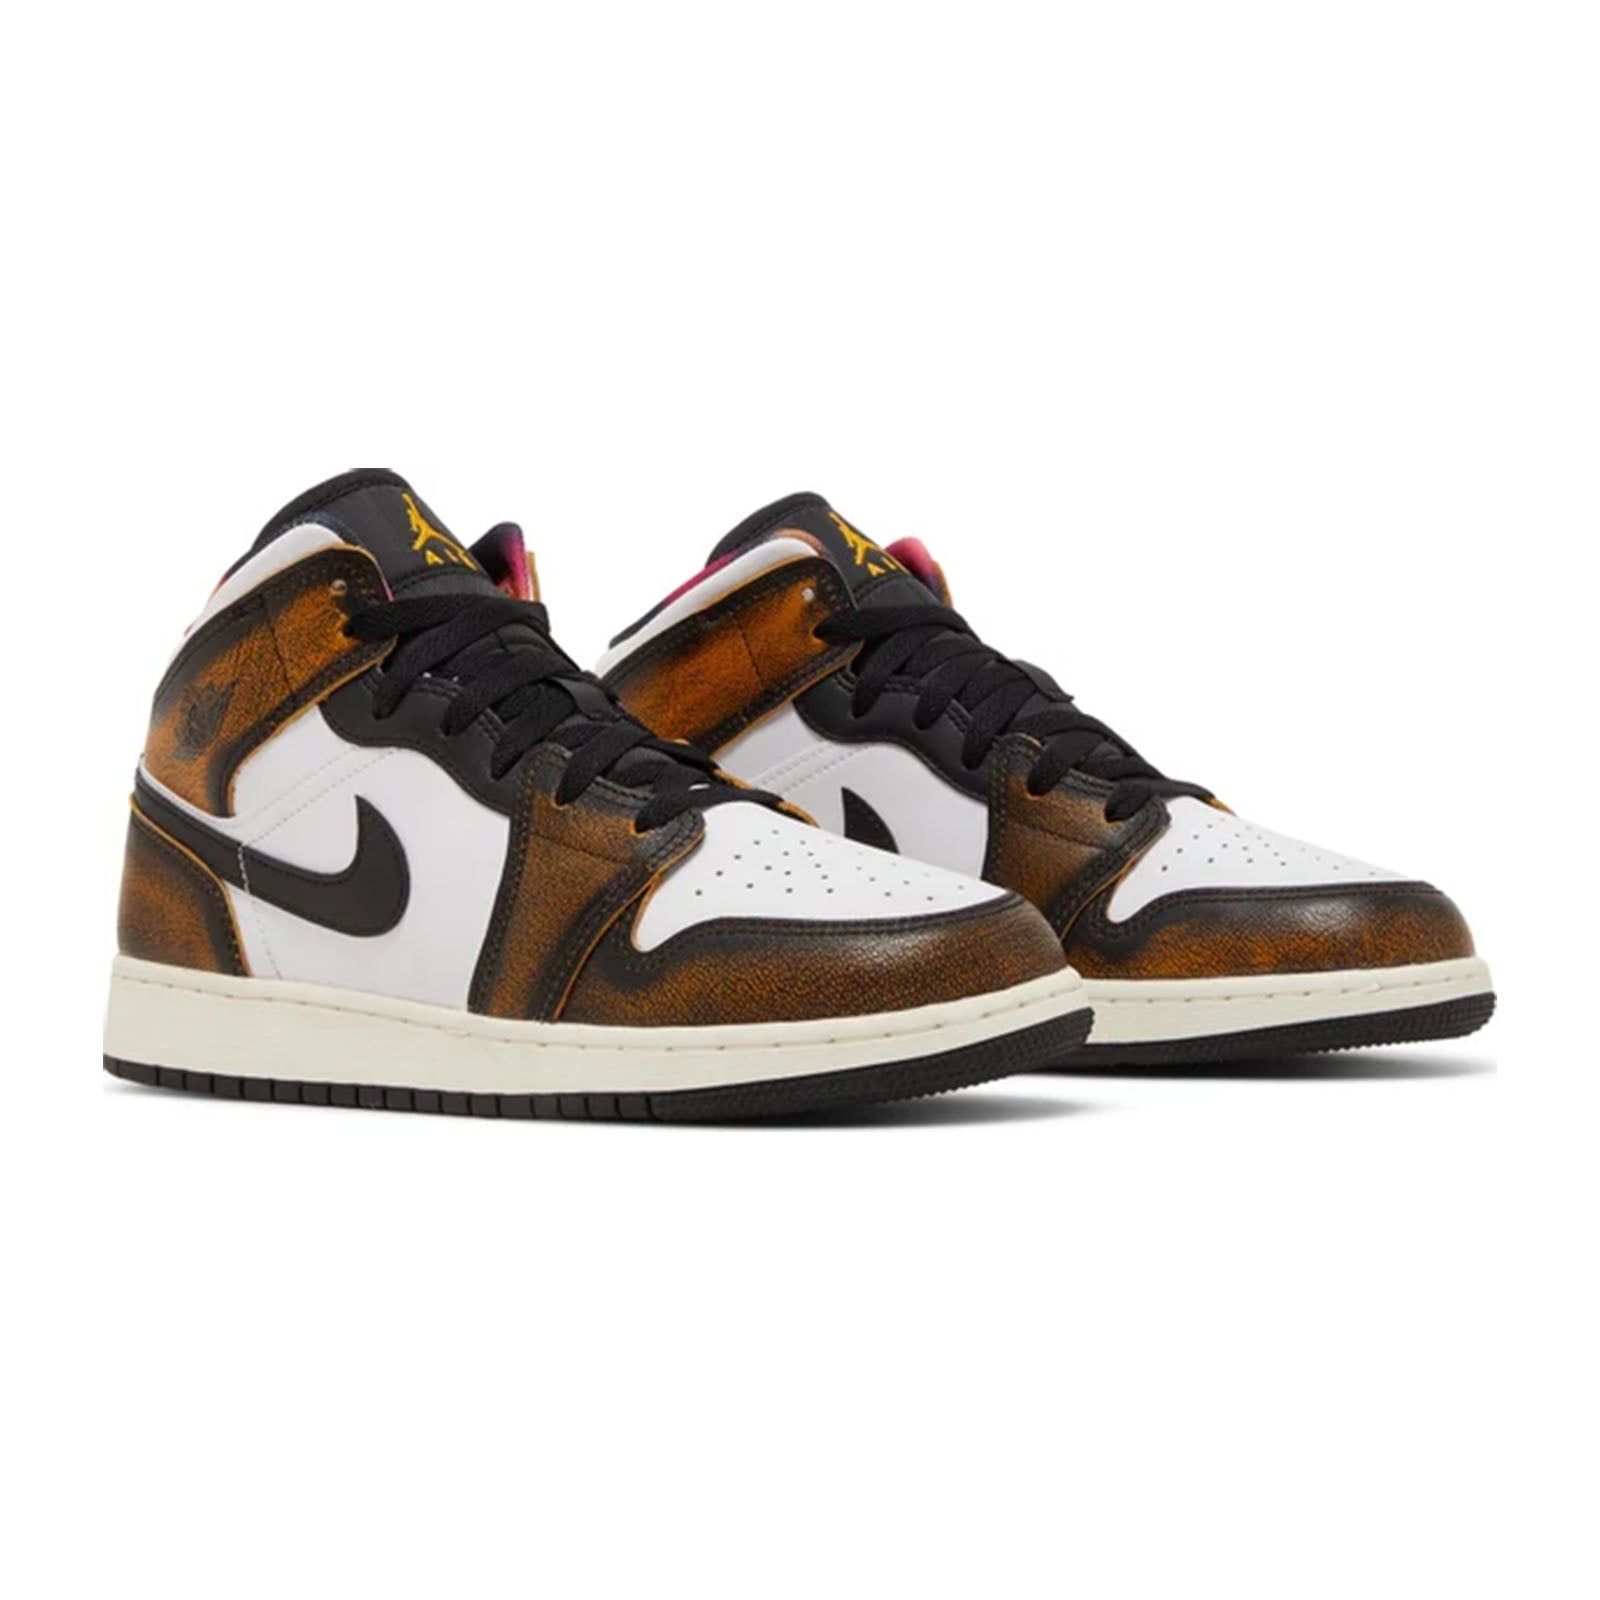 Air where to buy jordan 1 mid inside out (GS), Wear Away Taxi